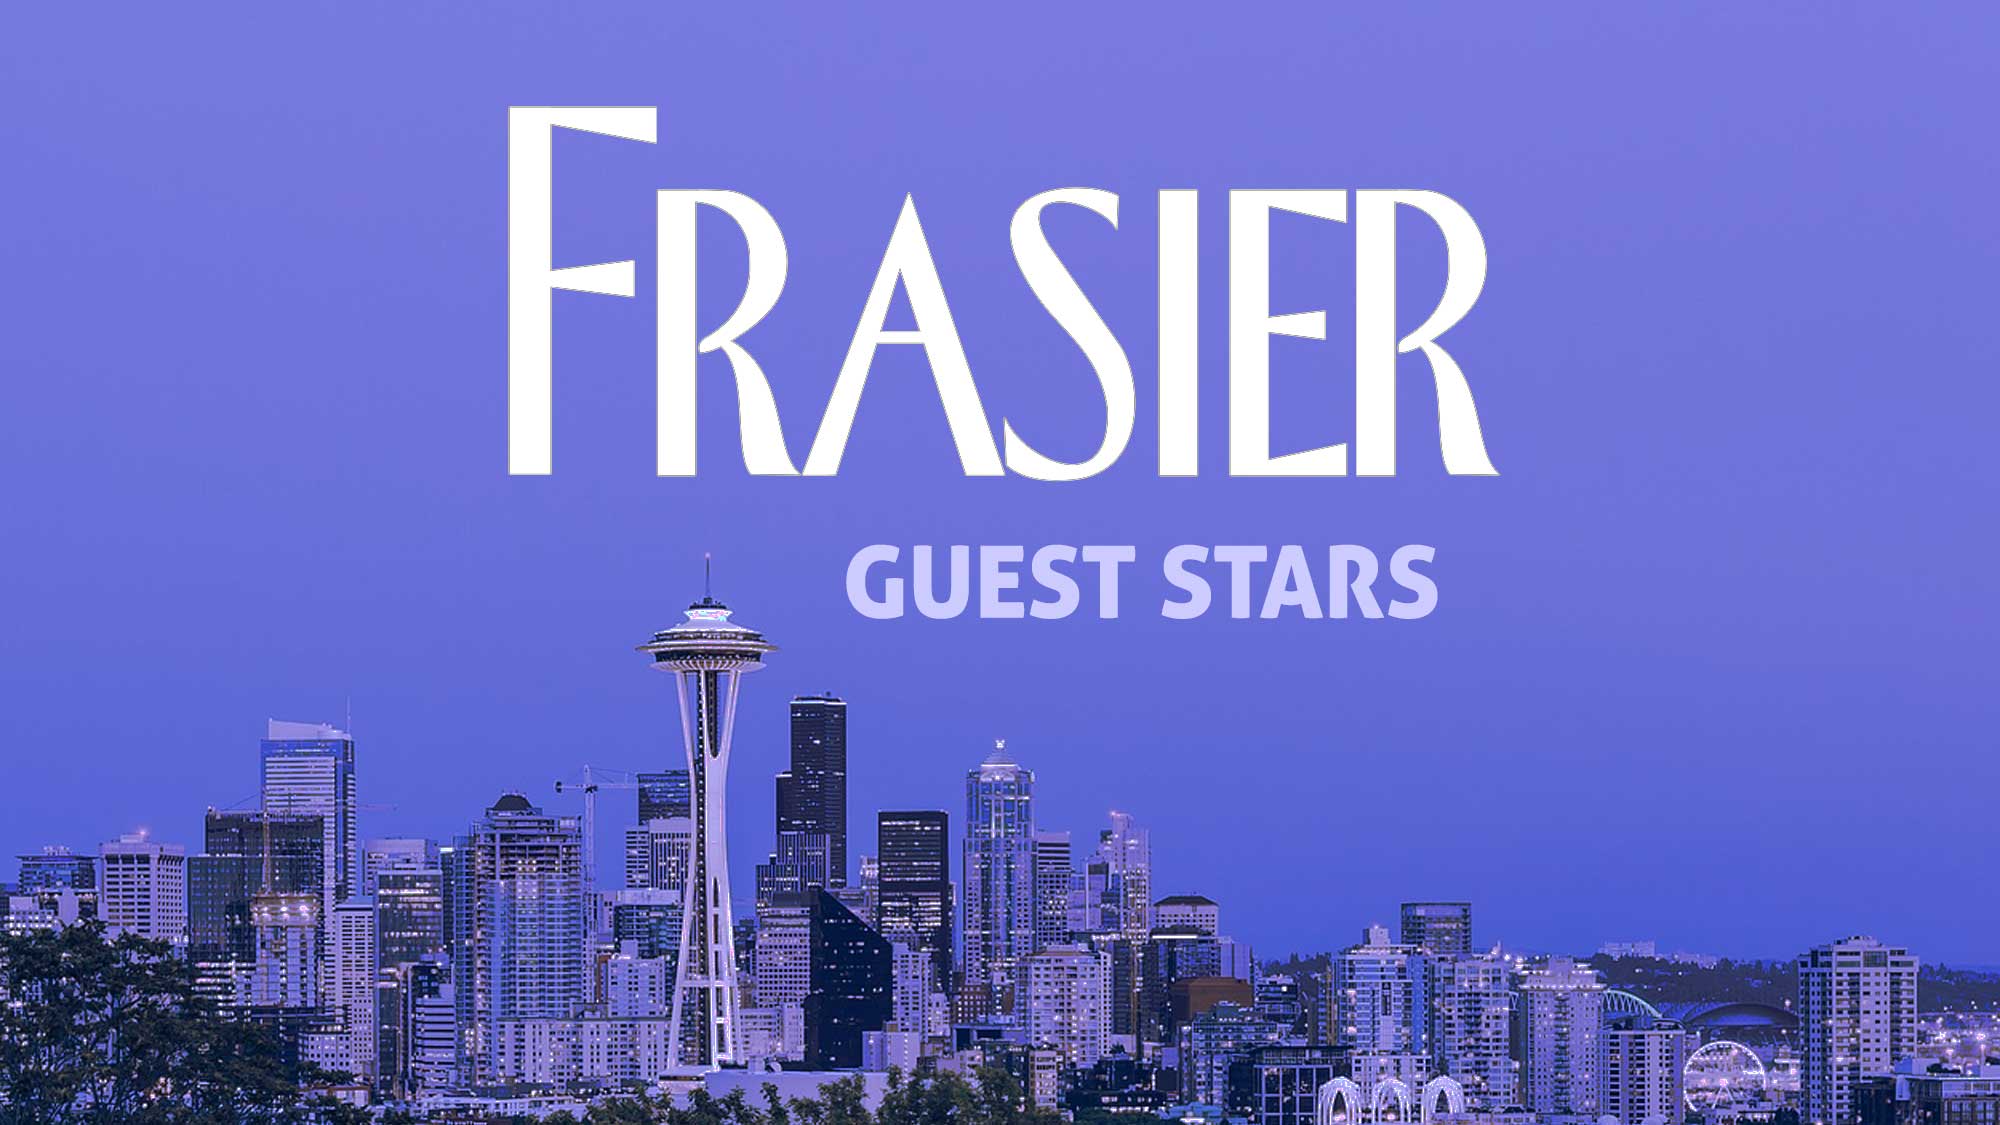 The 10 Best Frasier Guest Stars Ever To Appear On The Popular TV Sitcom